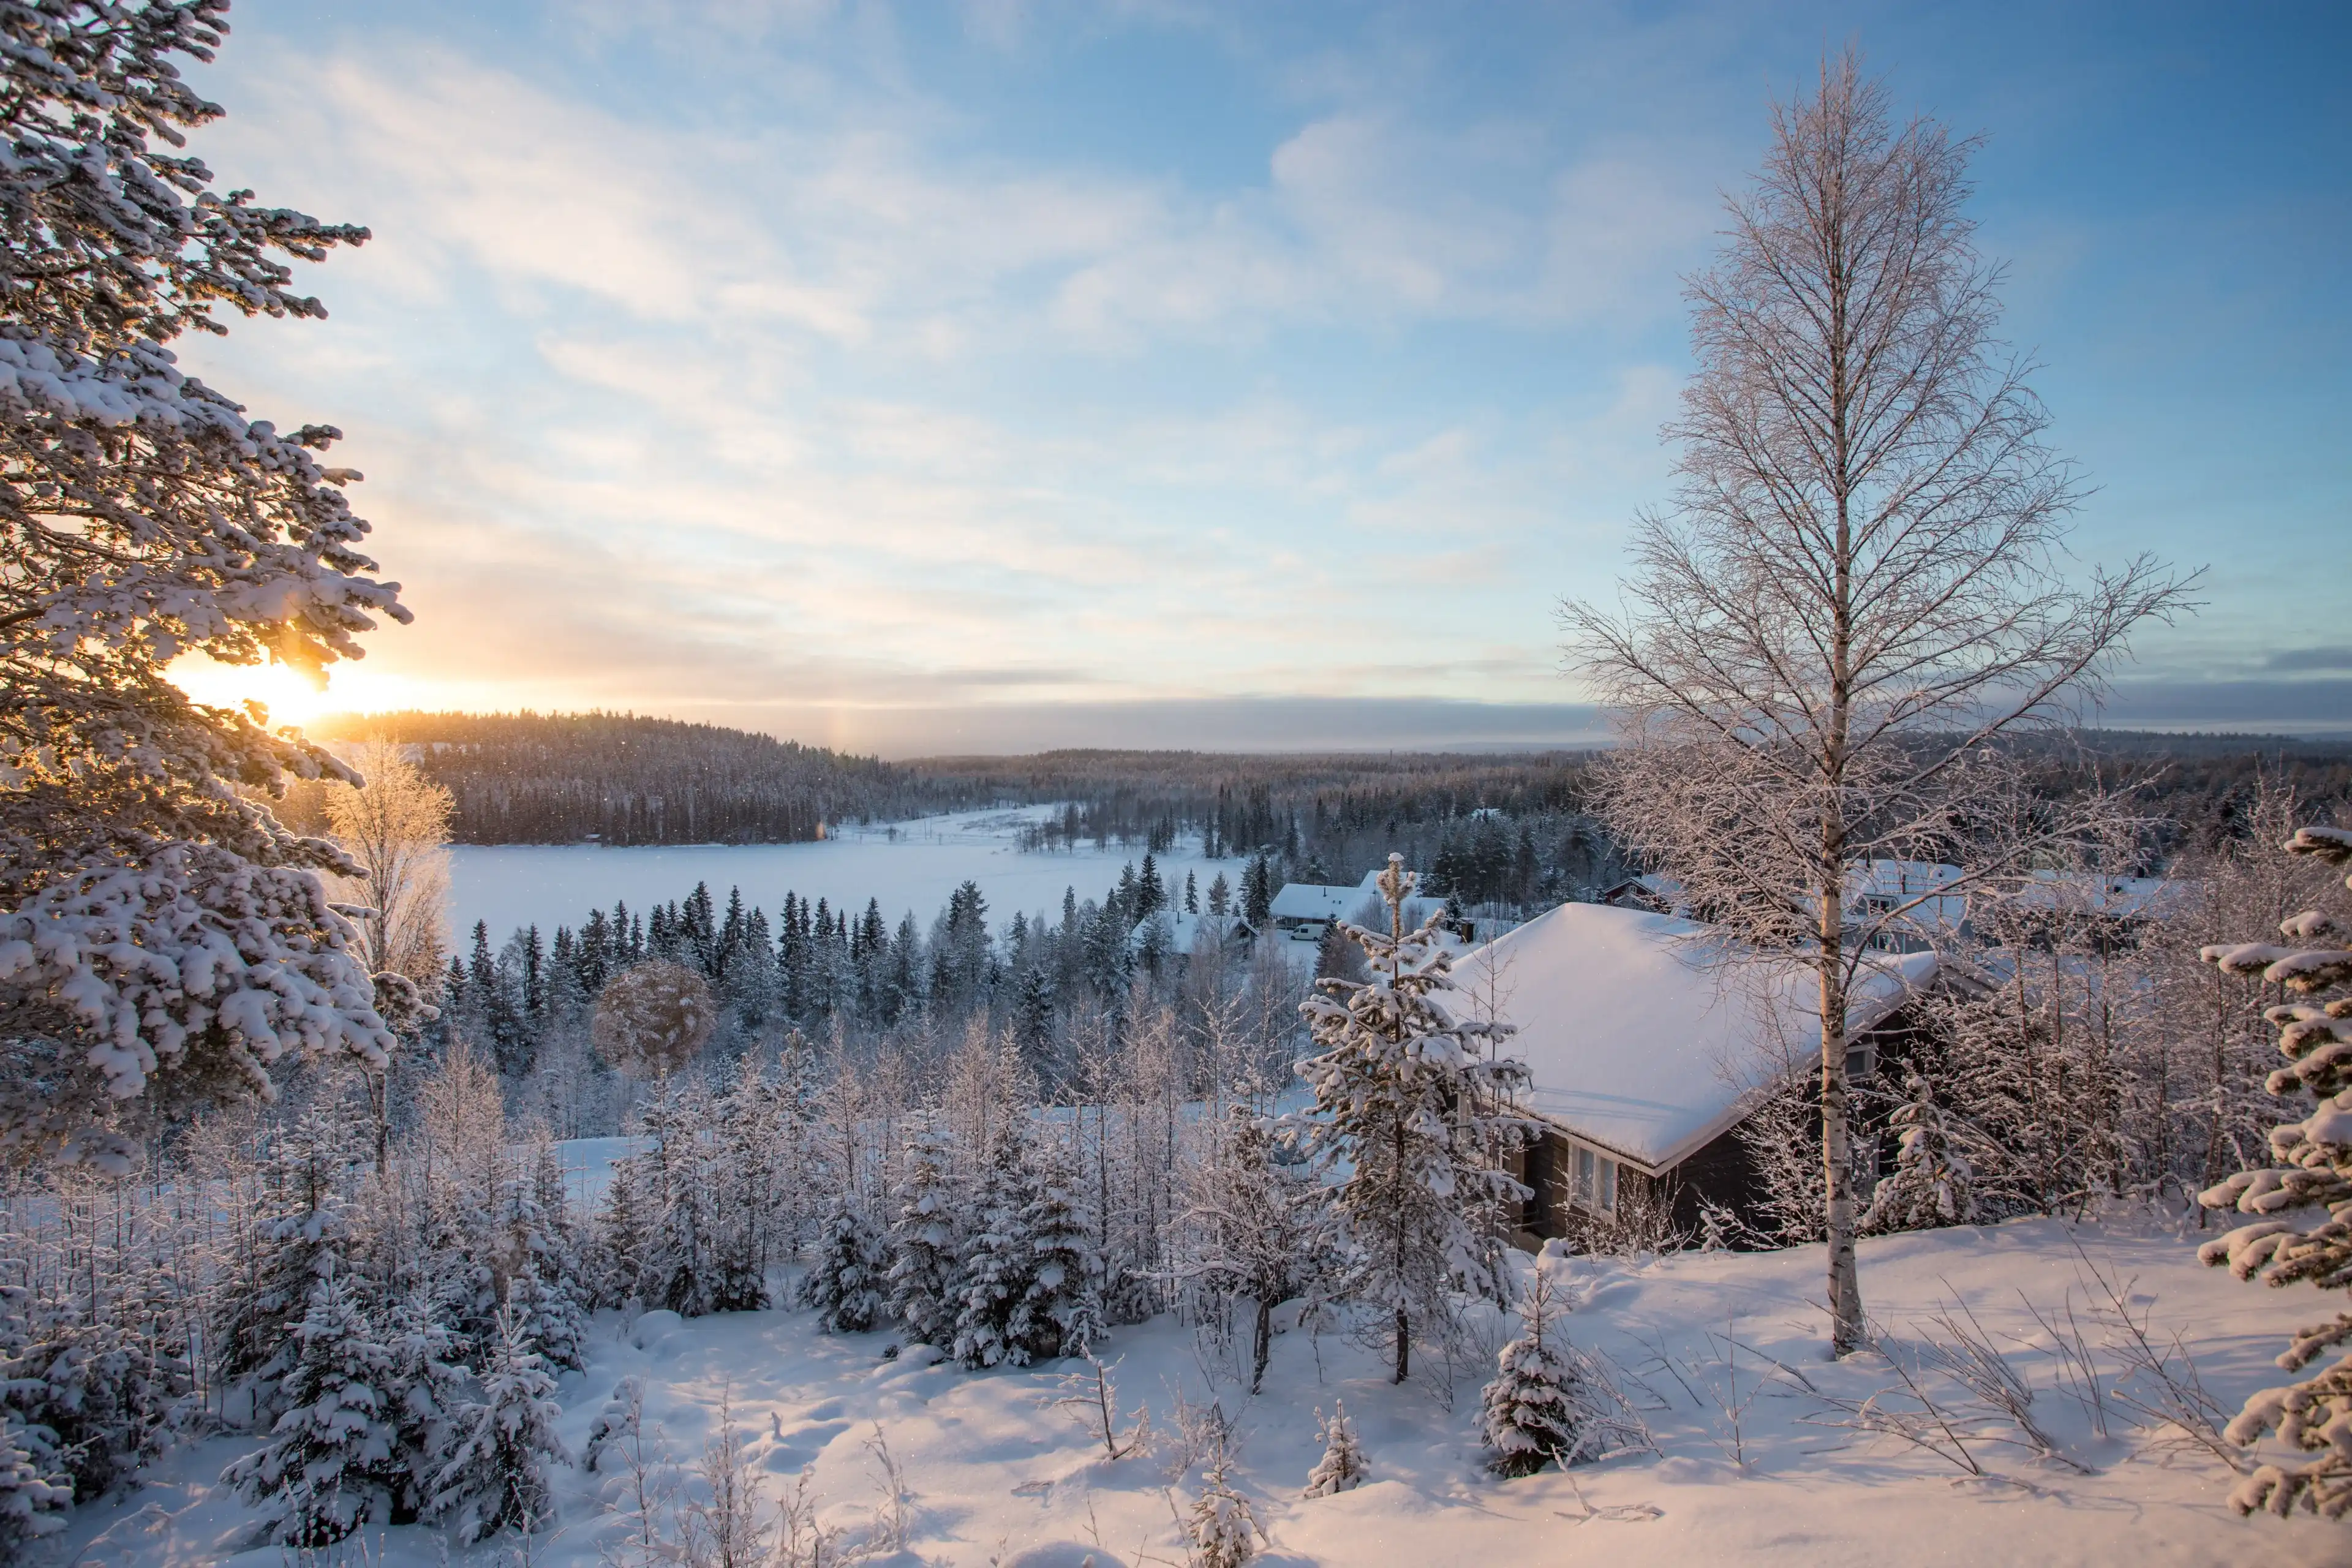 Lapland hotels. Best hotels in Lapland, Finland